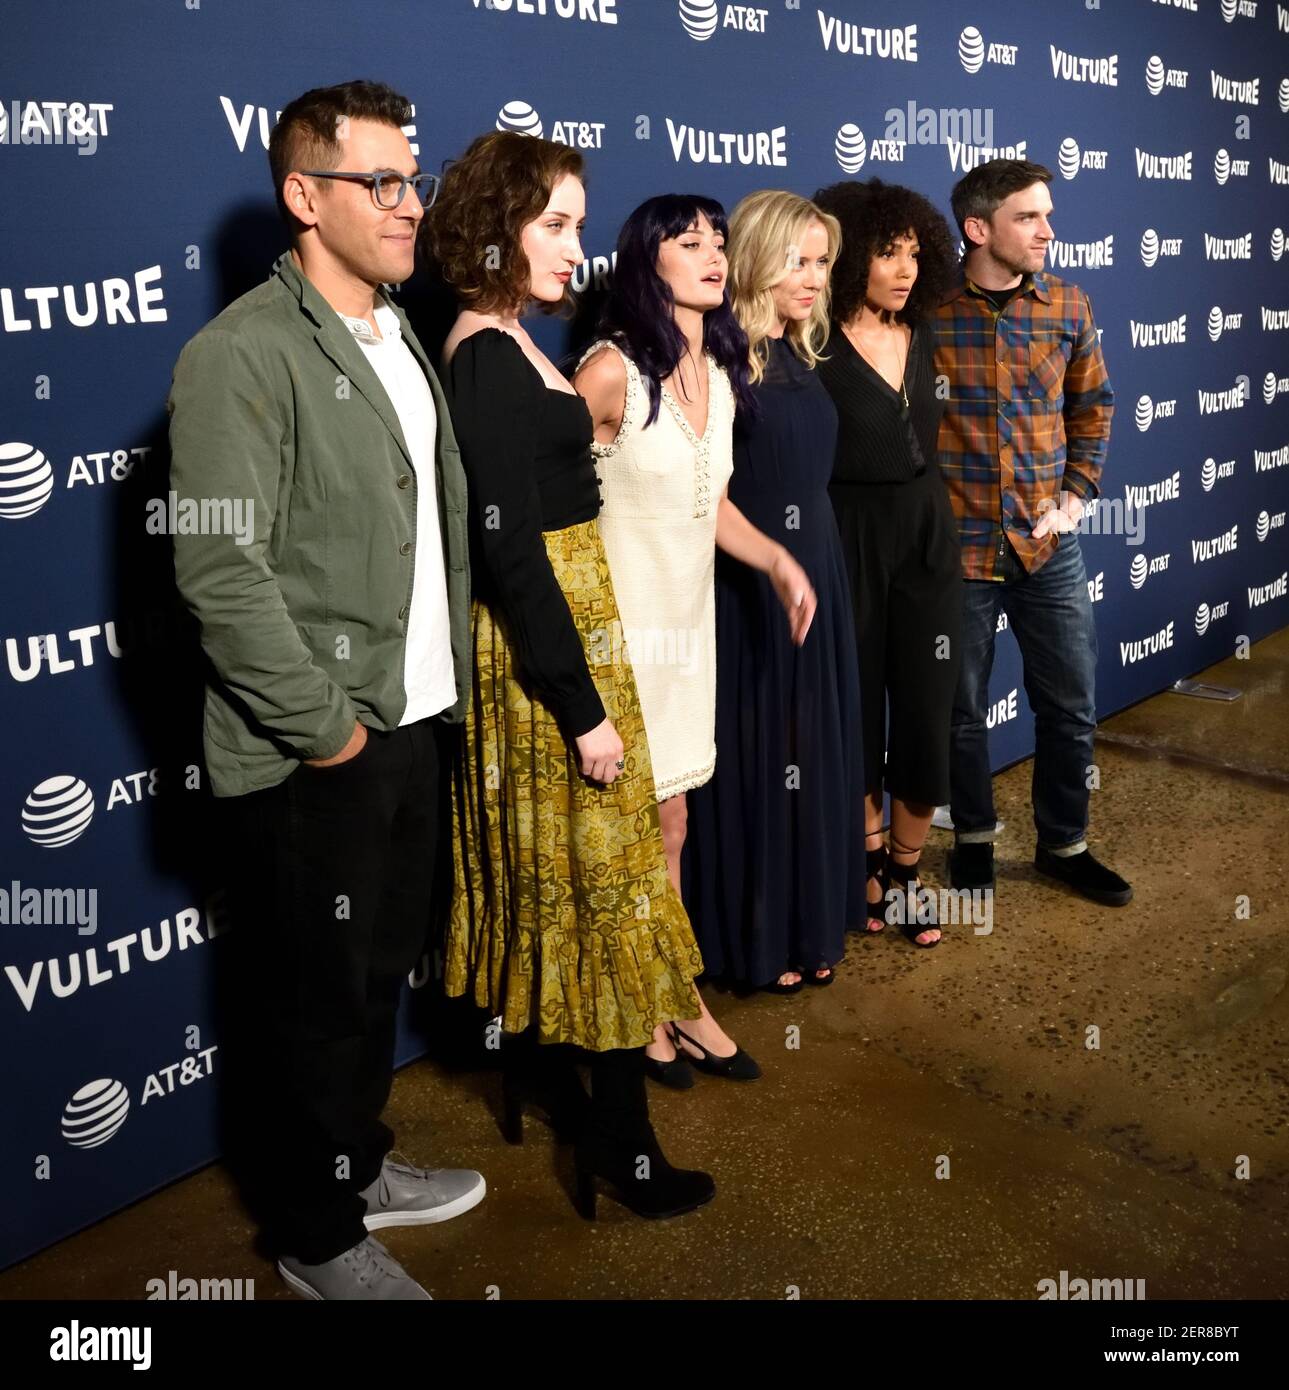 Sweetbitter cast and creators, L-R: Producer/writer Stu Zicherman, actors Eden Epstein and Ella Purnell, writer Stephanie Danler, panel moderator Jasmine Matthews and actor Evan Jonigkeit attend the Vulture Festival New York at Milk Studios in New York, NY on May 19, 2018. (Photo by Stephen Smith/SIPA USA) Stock Photo